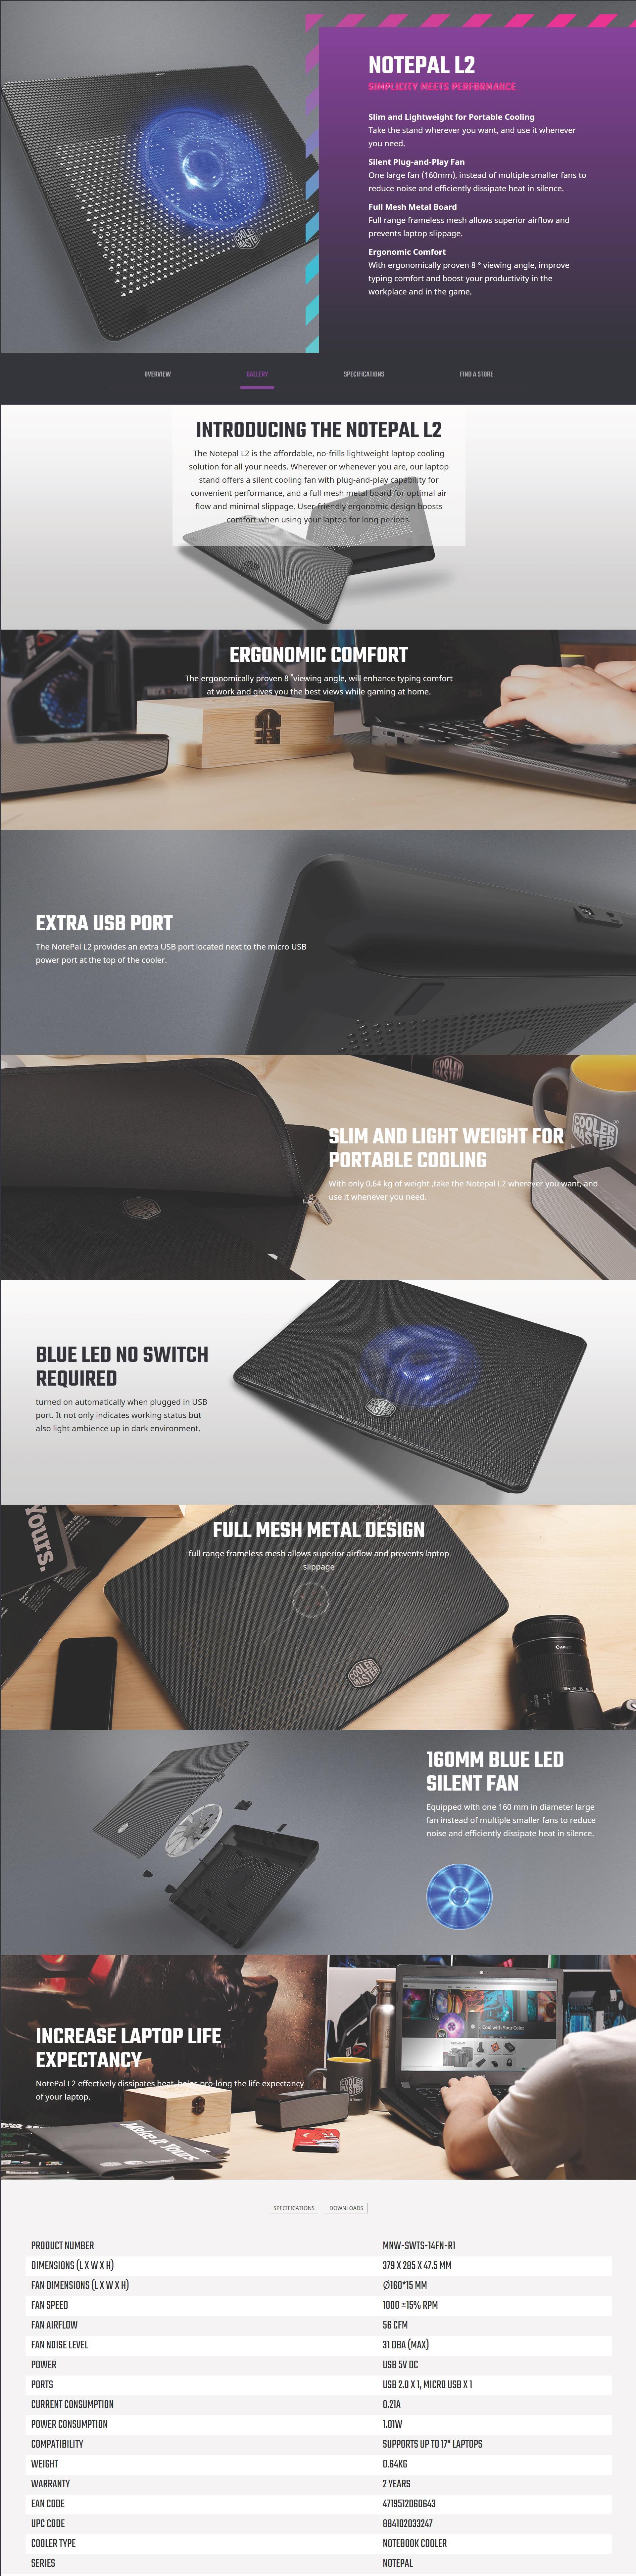 A large marketing image providing additional information about the product Cooler Master Notepal L2 Notebook Cooling Pad - Additional alt info not provided